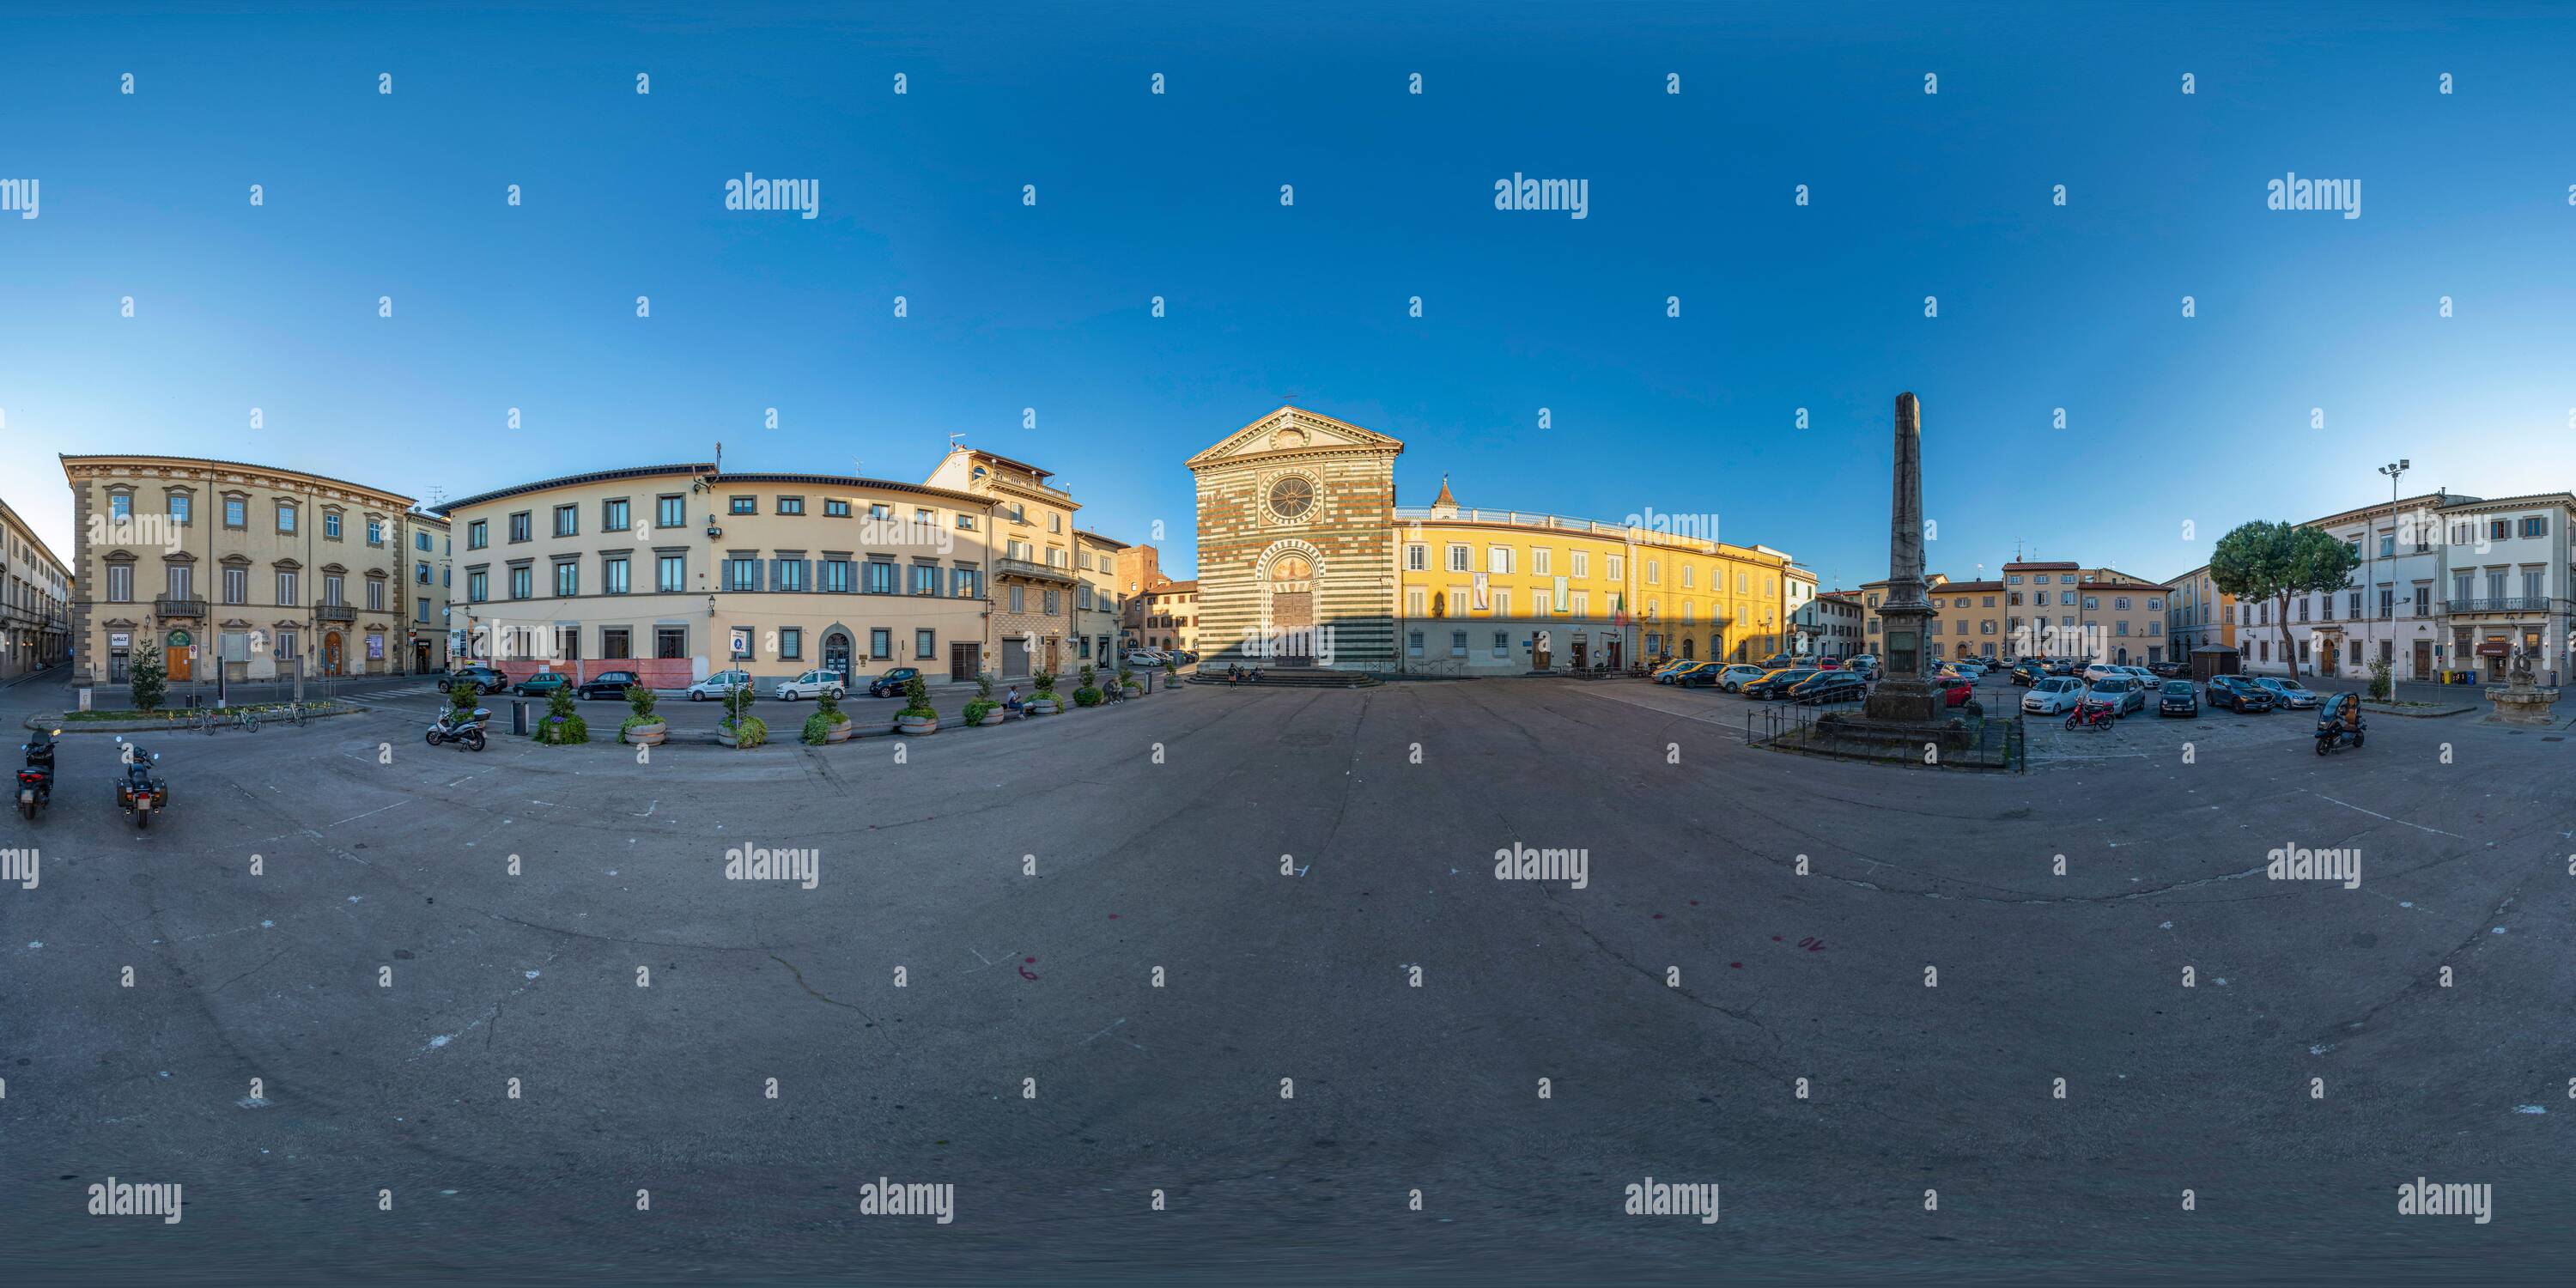 360 degree panoramic view of An unusual and never-before-seen Prato. Spectacular and empty while at the same time, alive and poignant in the 360-degrees images.